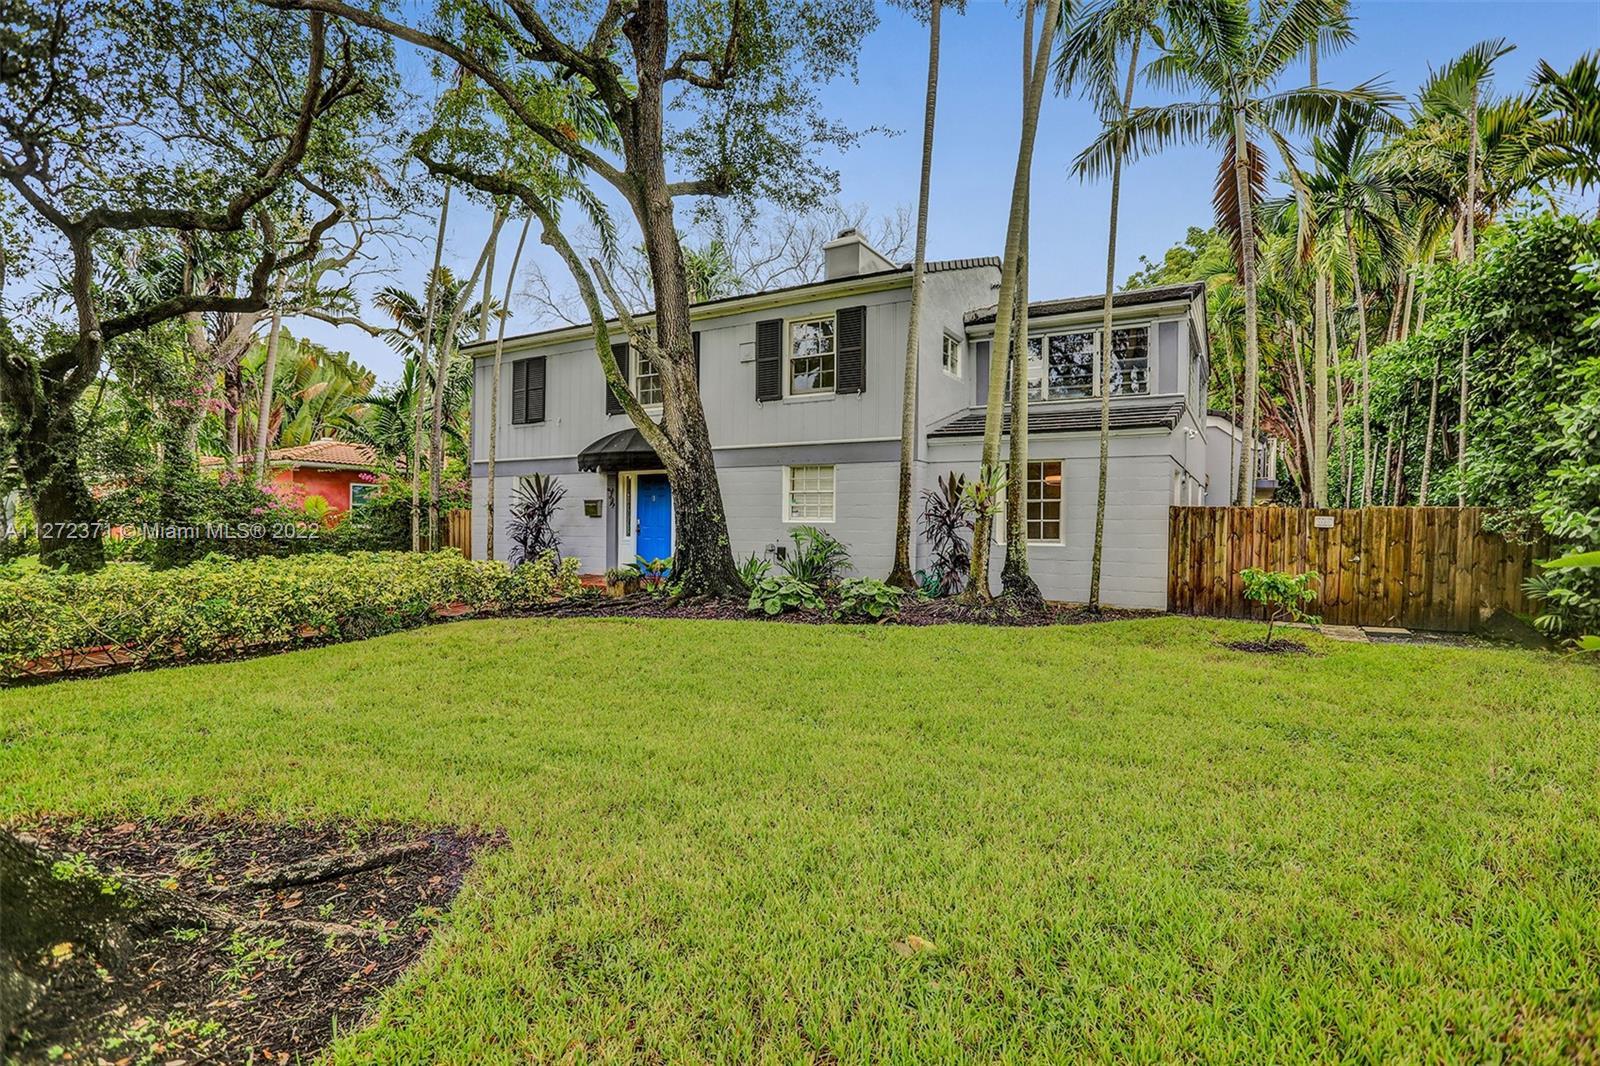 Short drive to downtown-business district and Miami Beach; this gorgeous 2-story Miami Shores home f